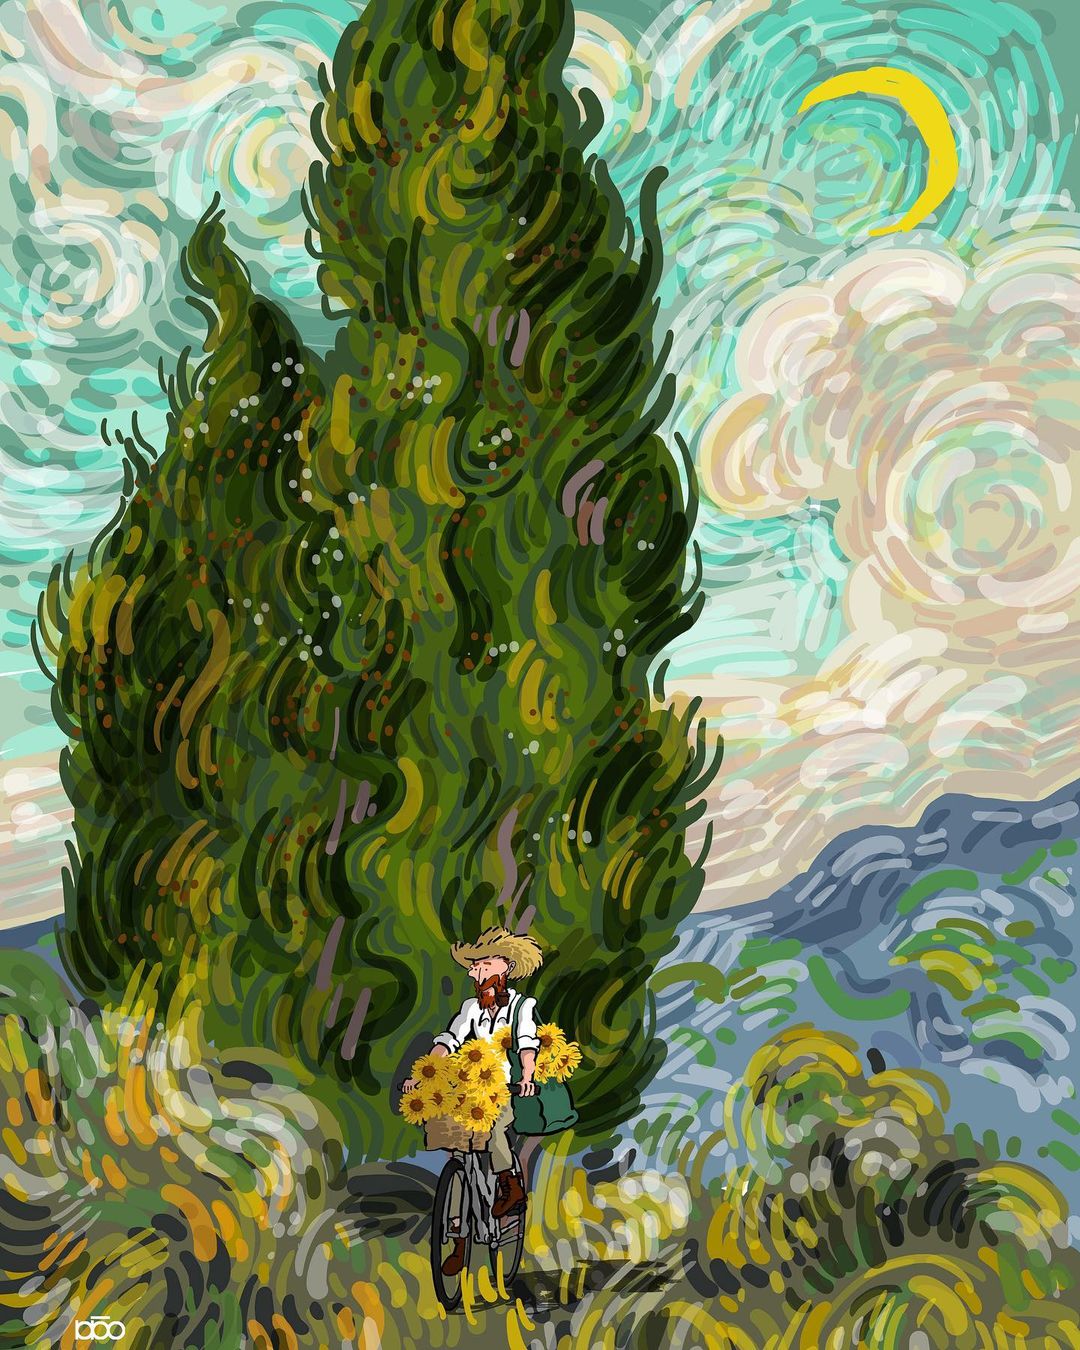 Vincent Van Goghs Life Recreated In His Own Art Style By Alireza Karimi Moghaddam 6